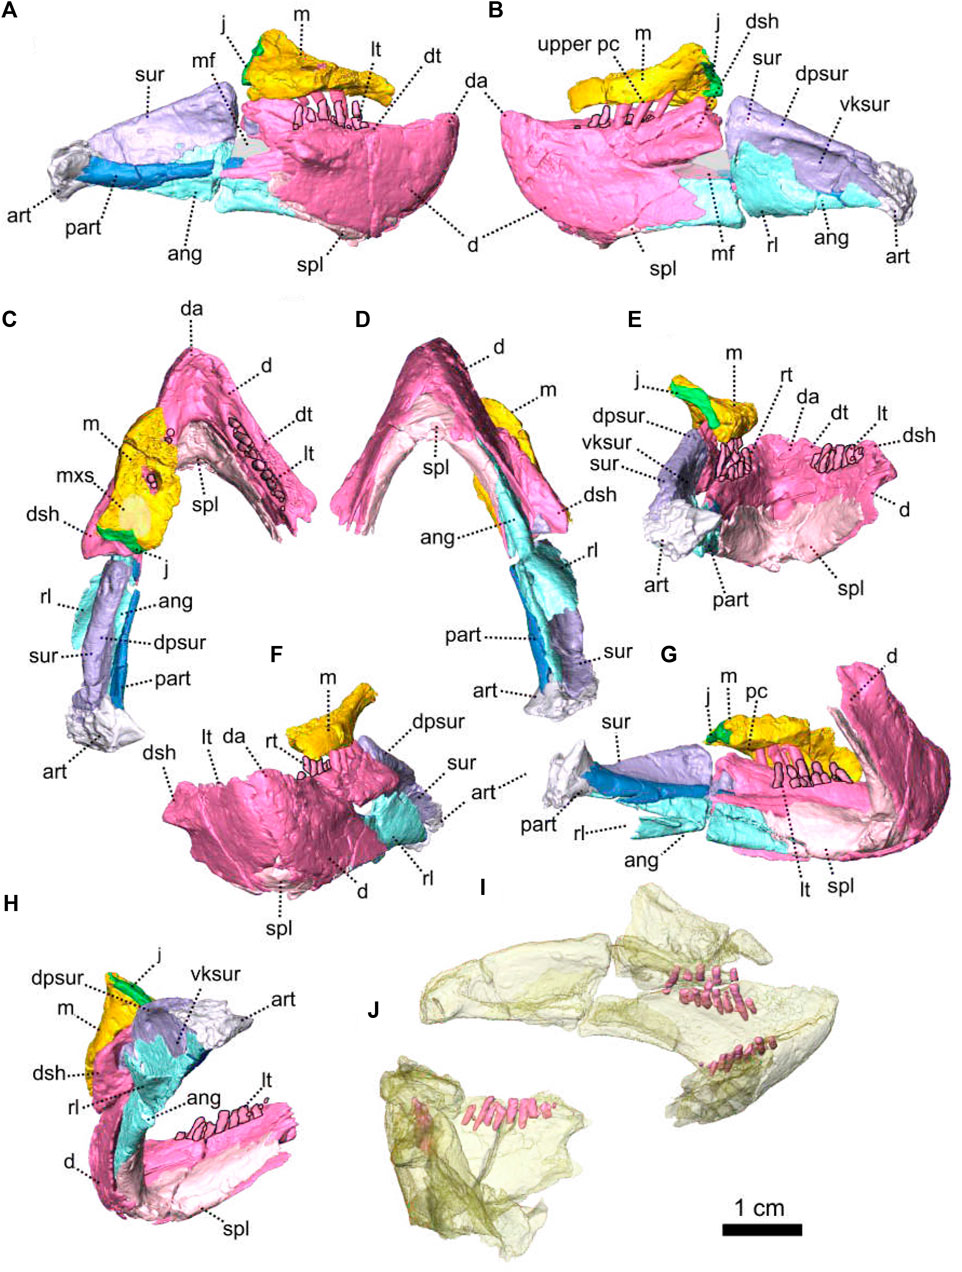 Specimens of Galesaurus planiceps included in the present study